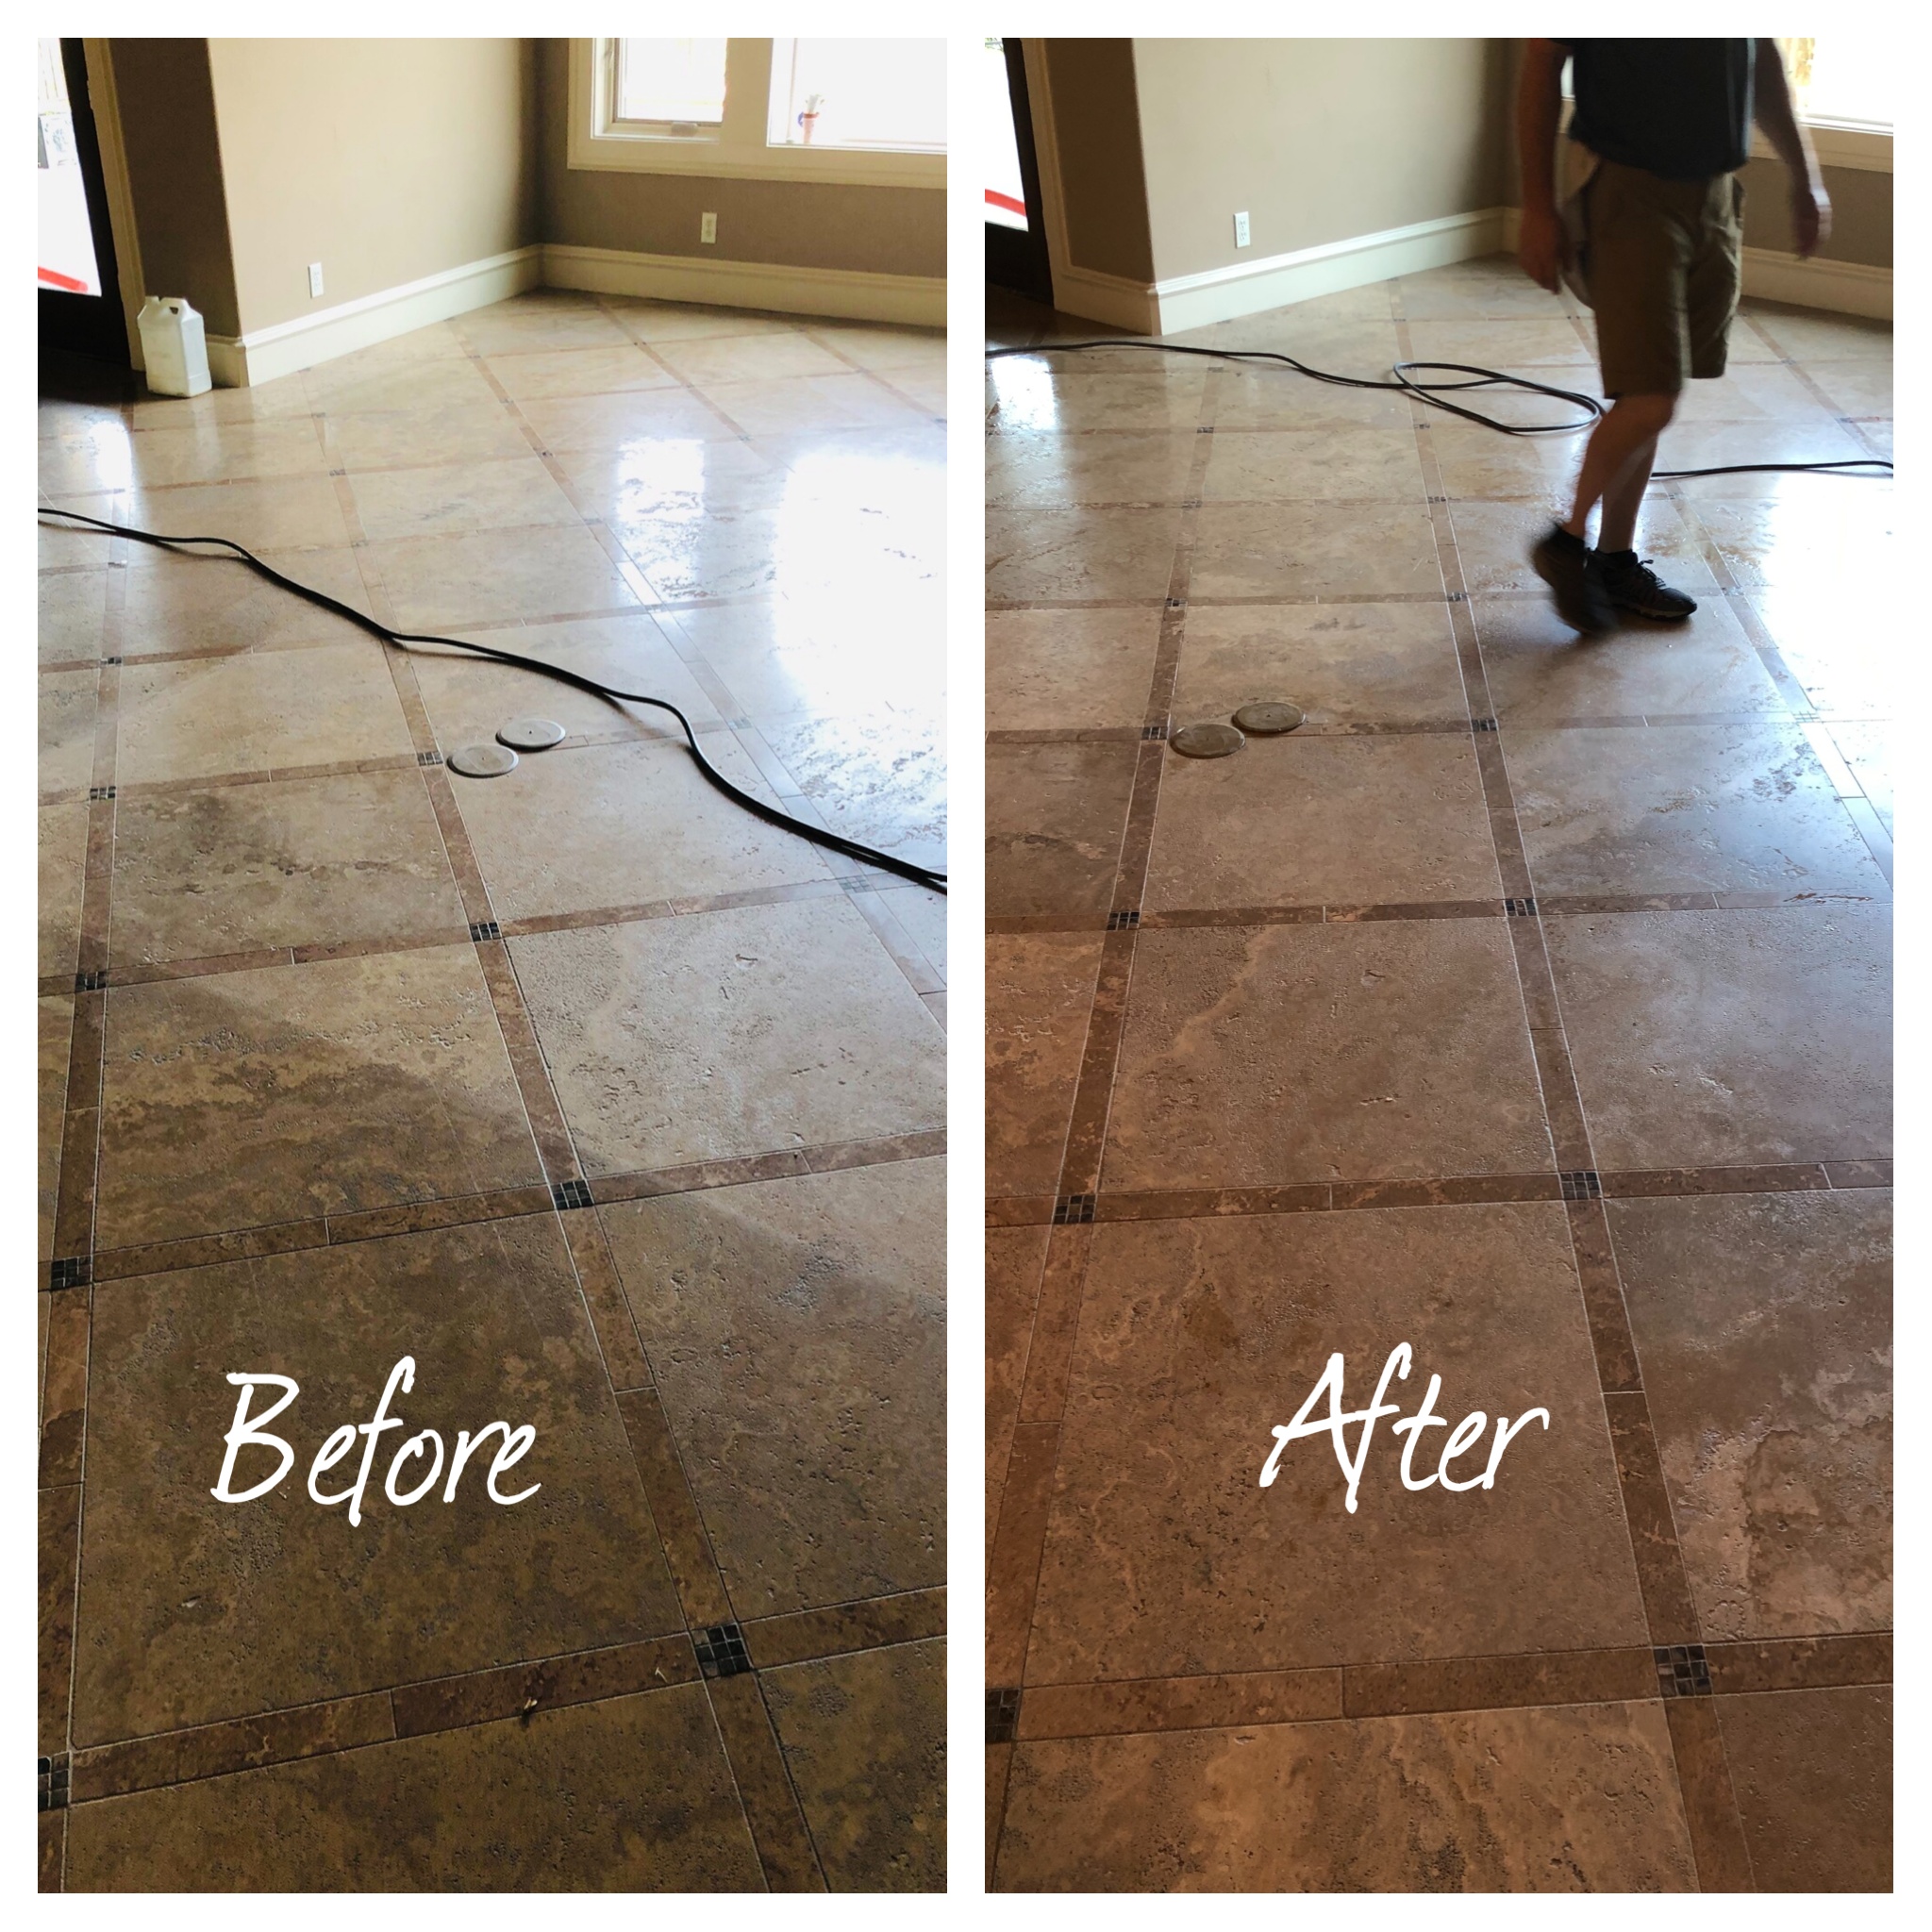 Travertine cleaning and sealing